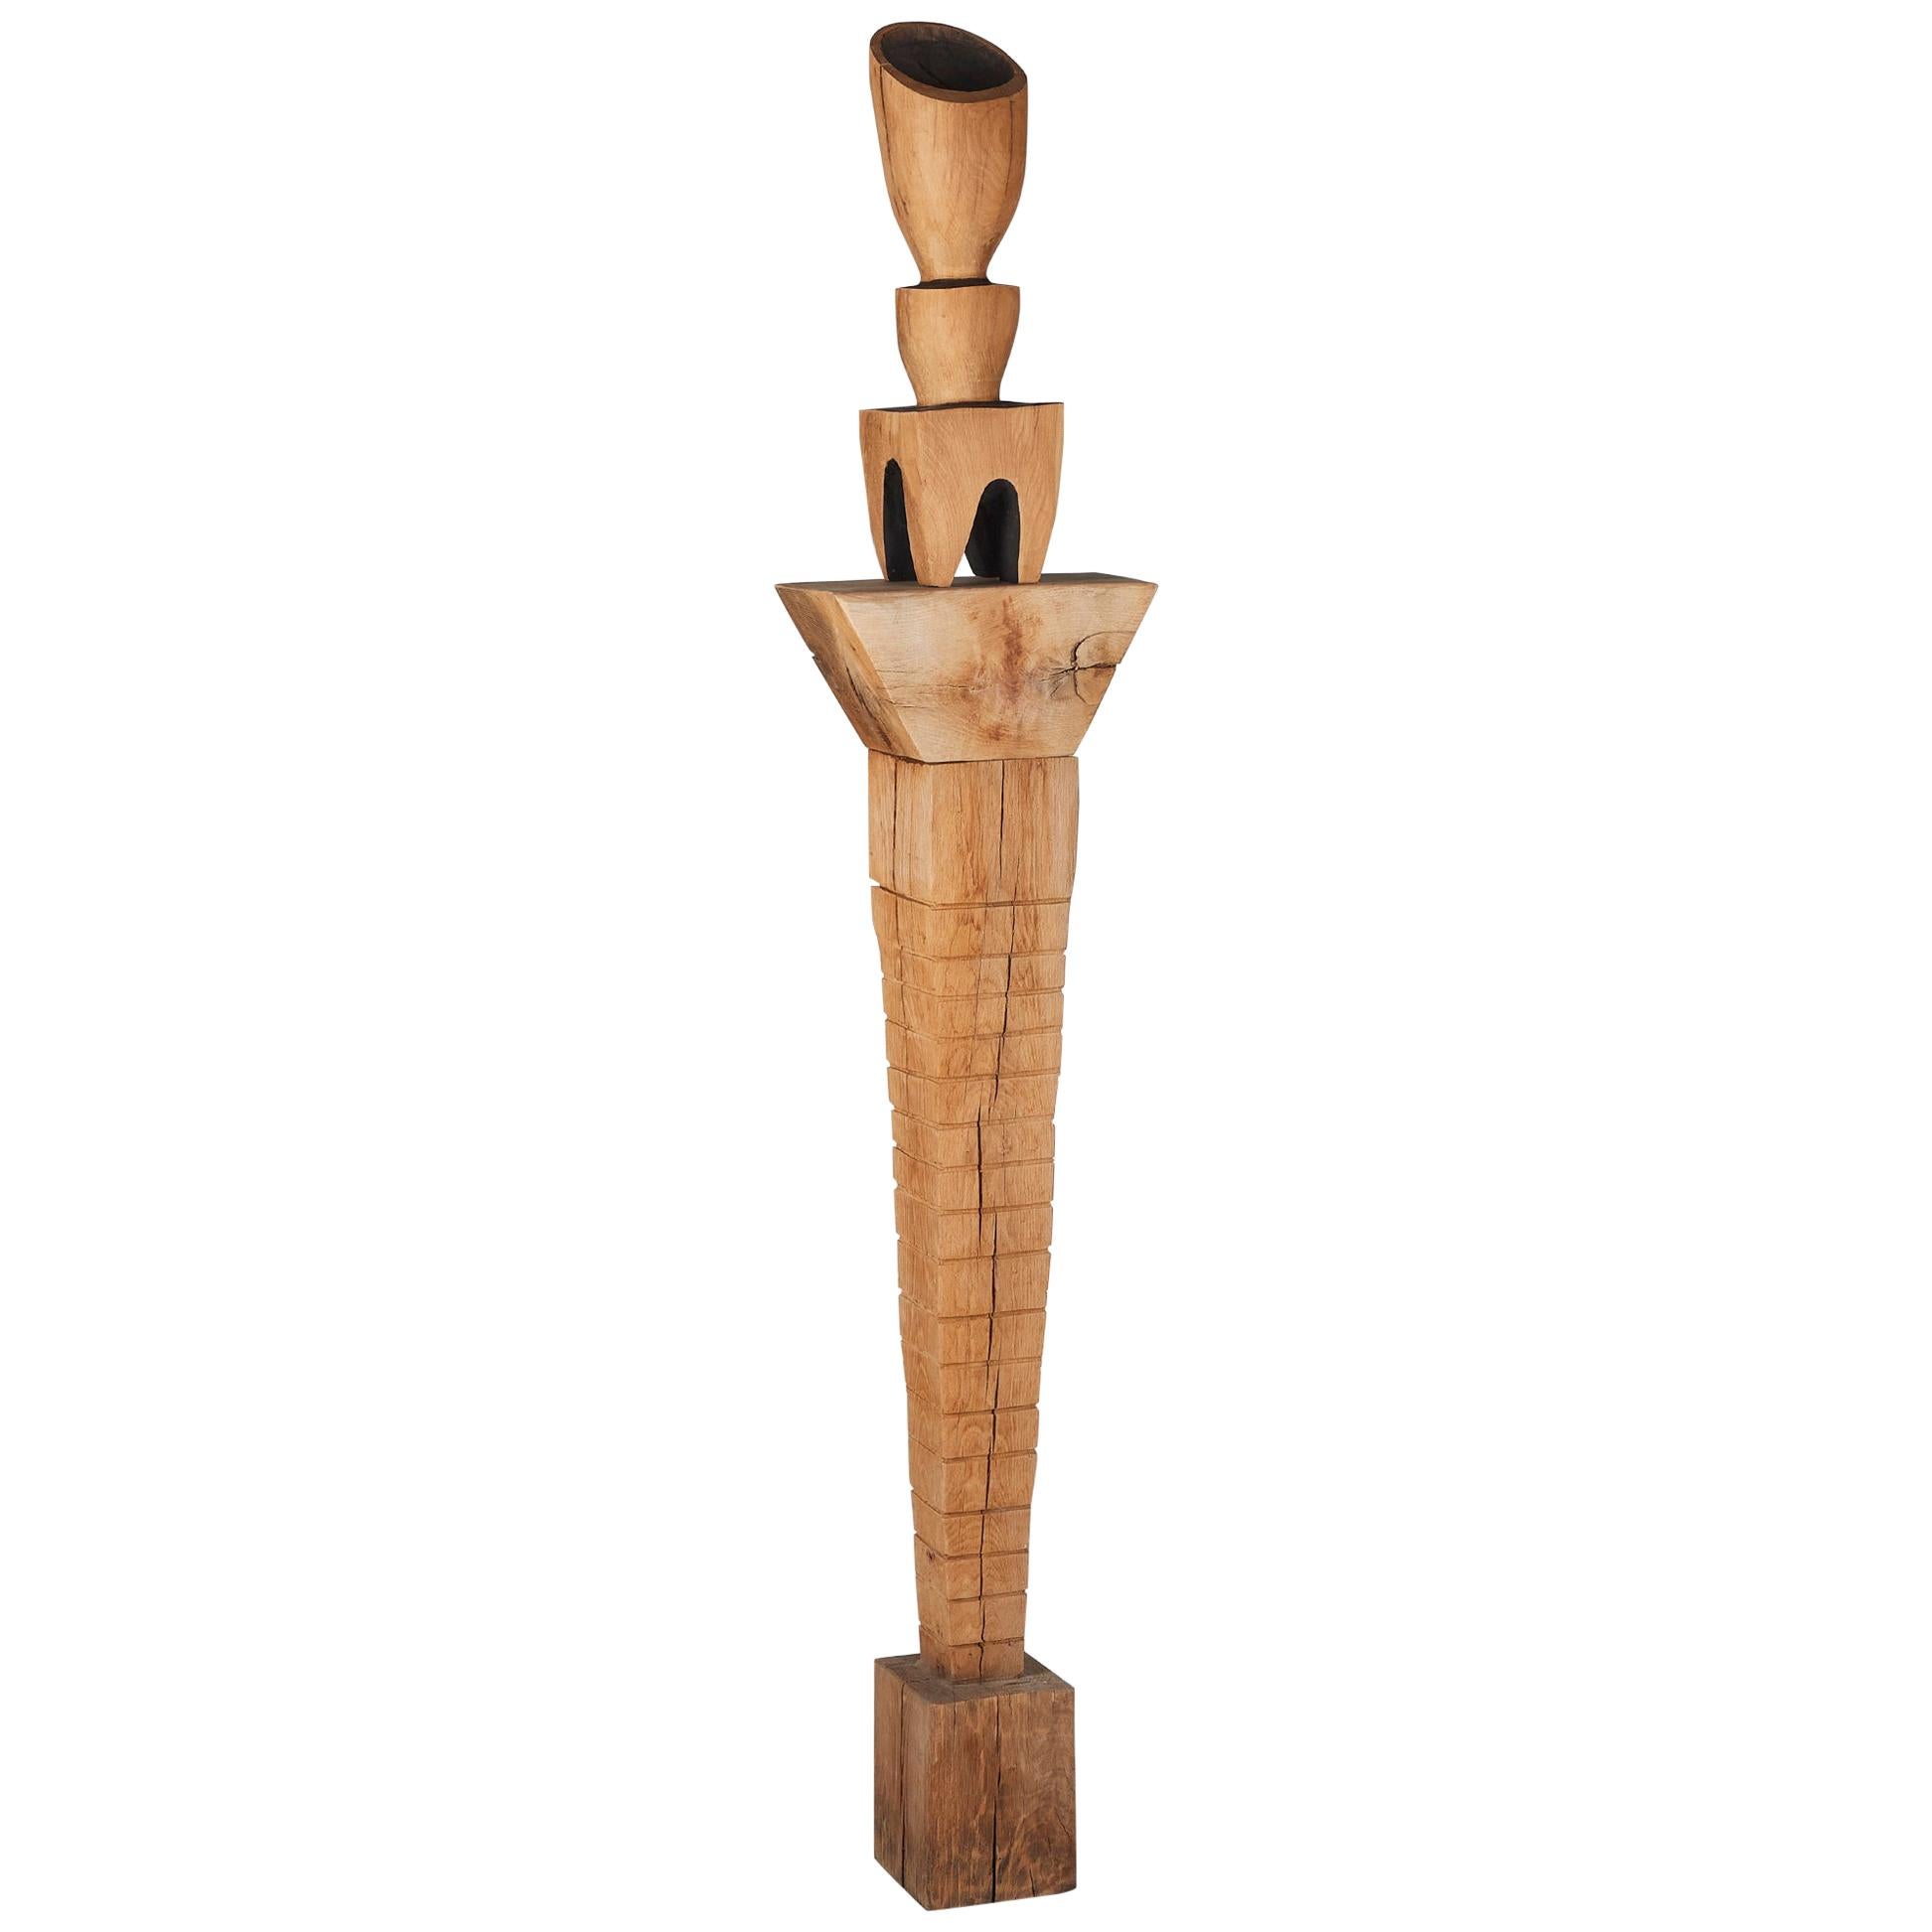 Franck Evennou, Large Scale Wooden TOTEM with Finial, France, 2020